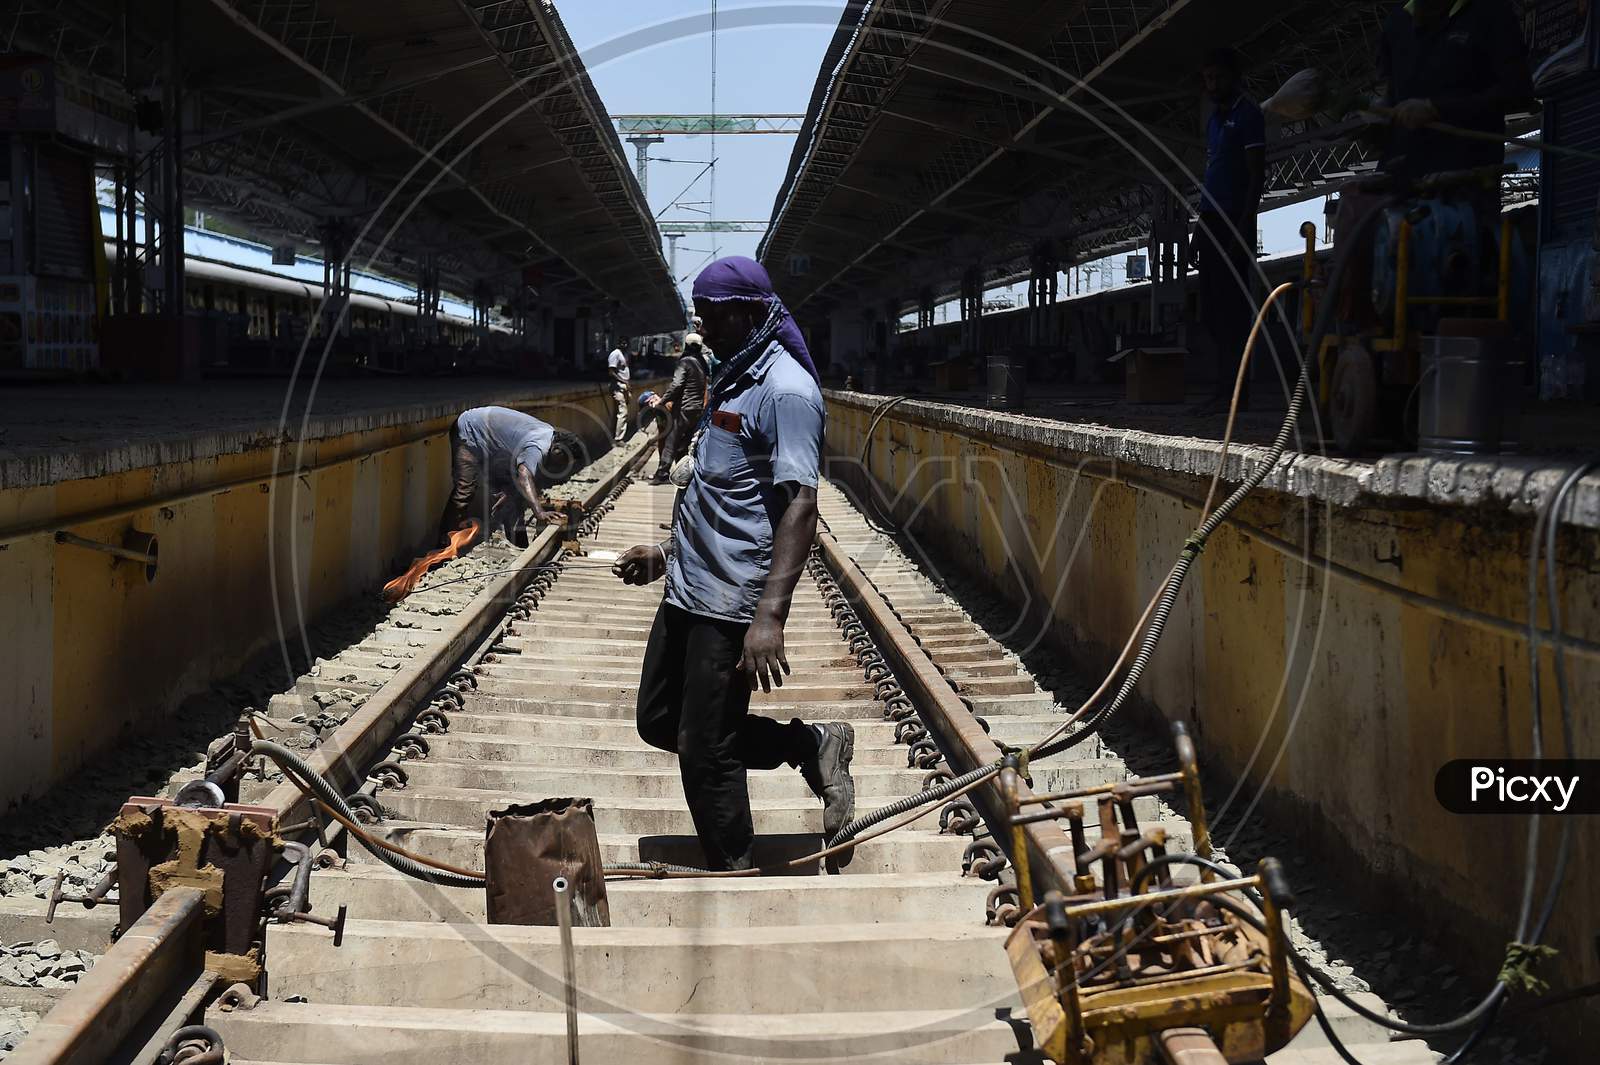 Workers Repair Metal Tracks At A Platform At Central Railway Station As Part Of The Preparations To Reopen The Station Under The Government'S Decision To Ease The Lockdown Put As A Preventive Measure Against The Covid-19 Coronavirus, In Chennai On Friday.Oct.9.2020,